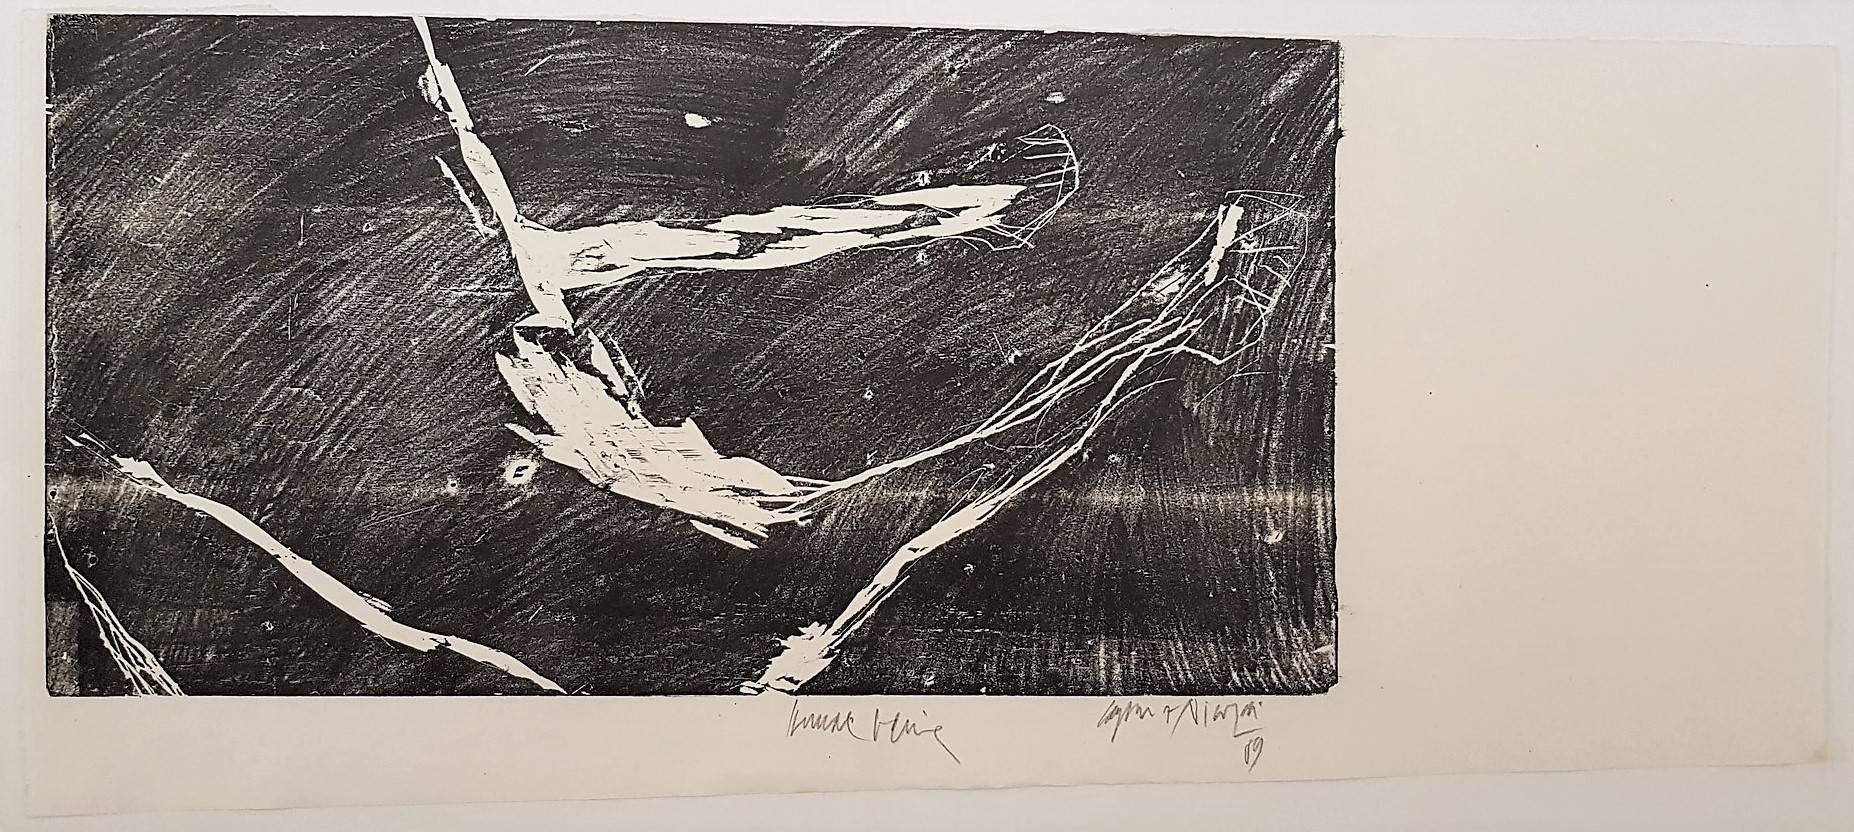 Woodcut
Year: 1989
Signed, dated and titled by hand
Size: 14.4 × 27.3 on 16.4 × 38.4 inches
COA provided

Carsten Nicolai (b. 1965 in Karl-Marx-Stadt (Chemnitz), Germany) is one of the only contemporary artists working simultaneously in visual and